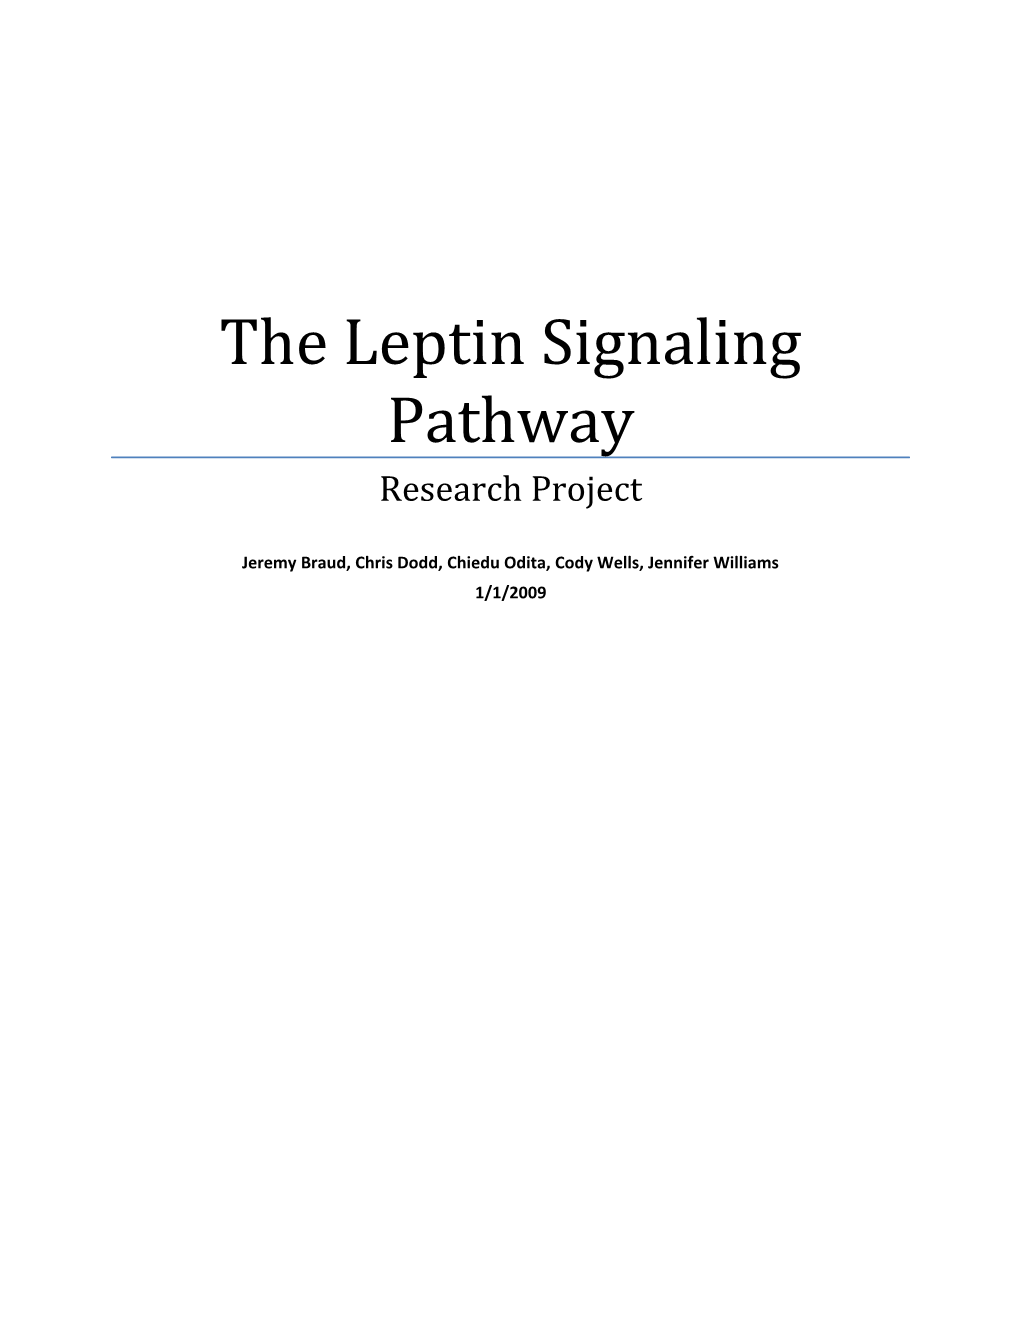 The Leptin Signaling Pathway